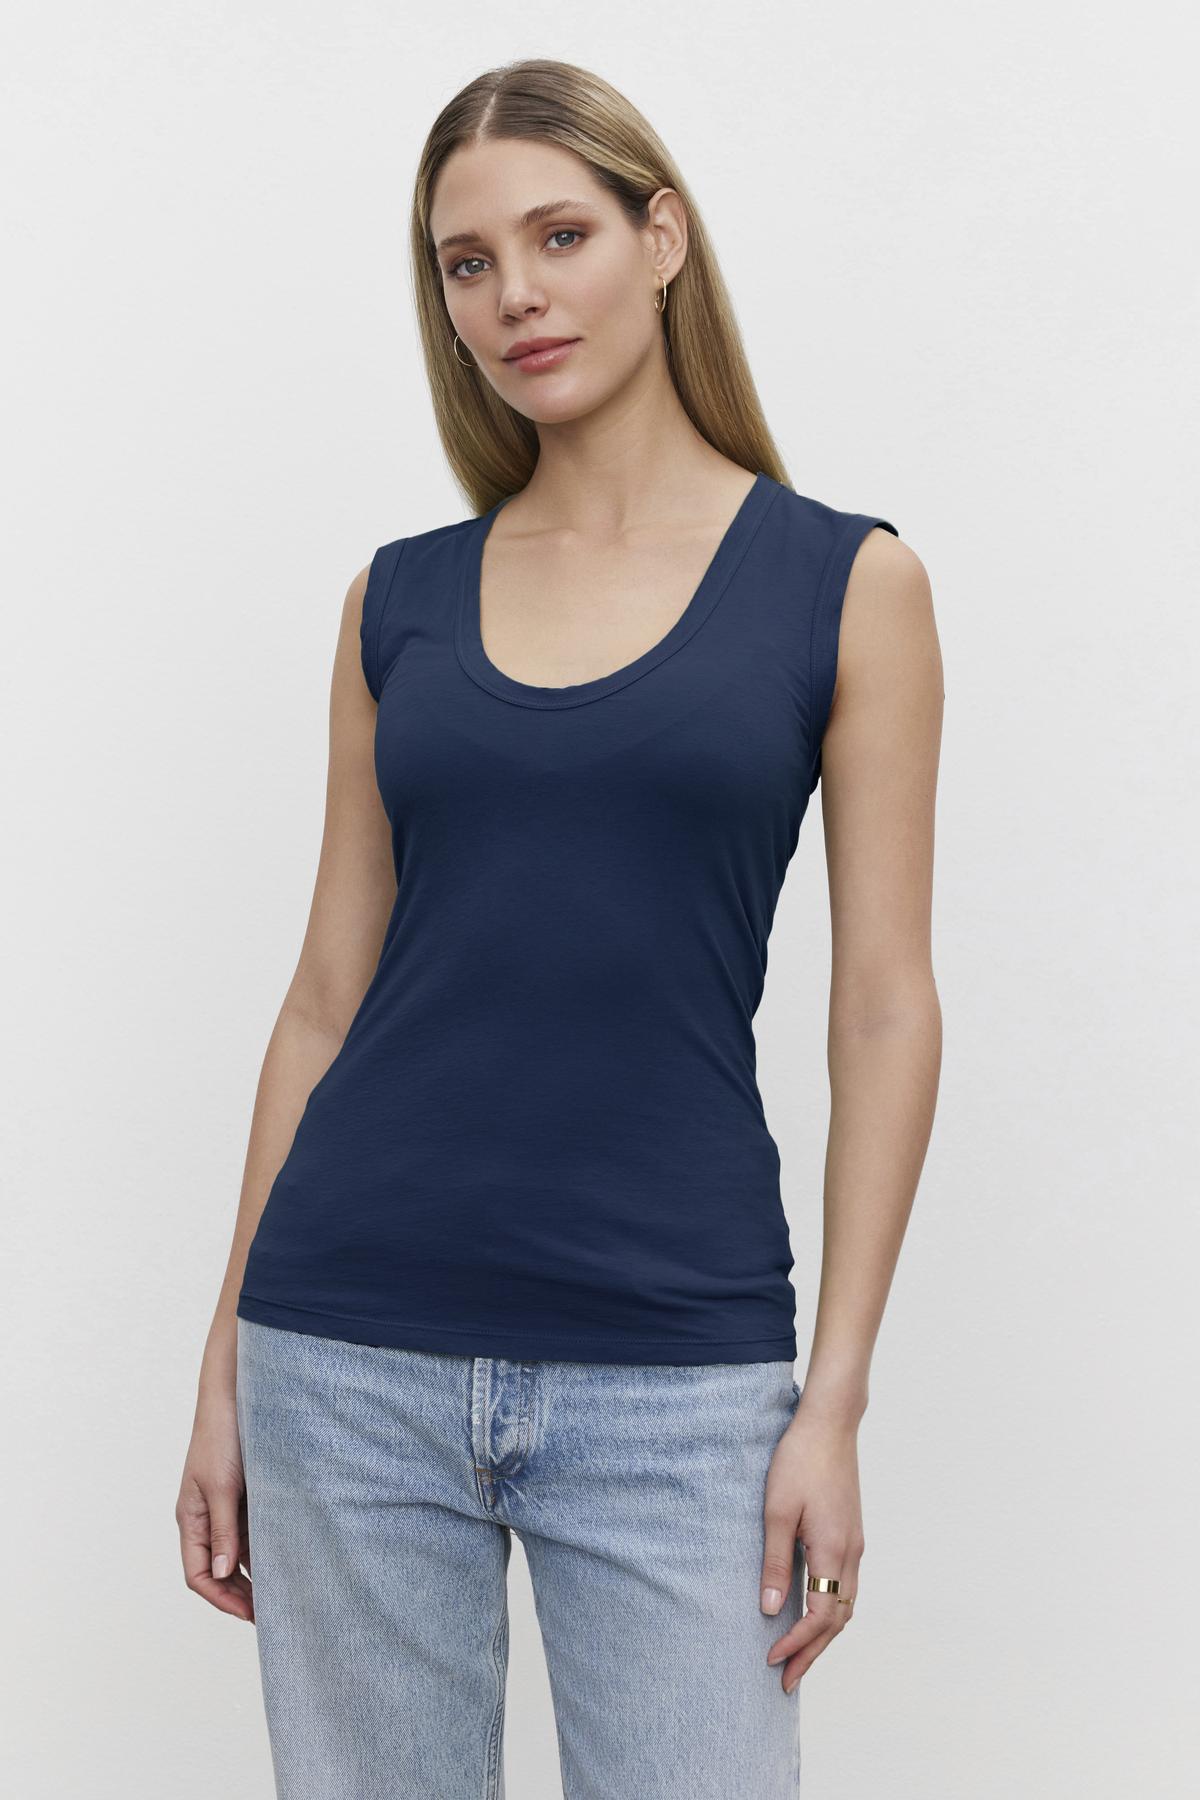   A woman in a navy ESTINA GAUZY WHISPER FITTED TANK TOP by Velvet by Graham & Spencer and jeans. 